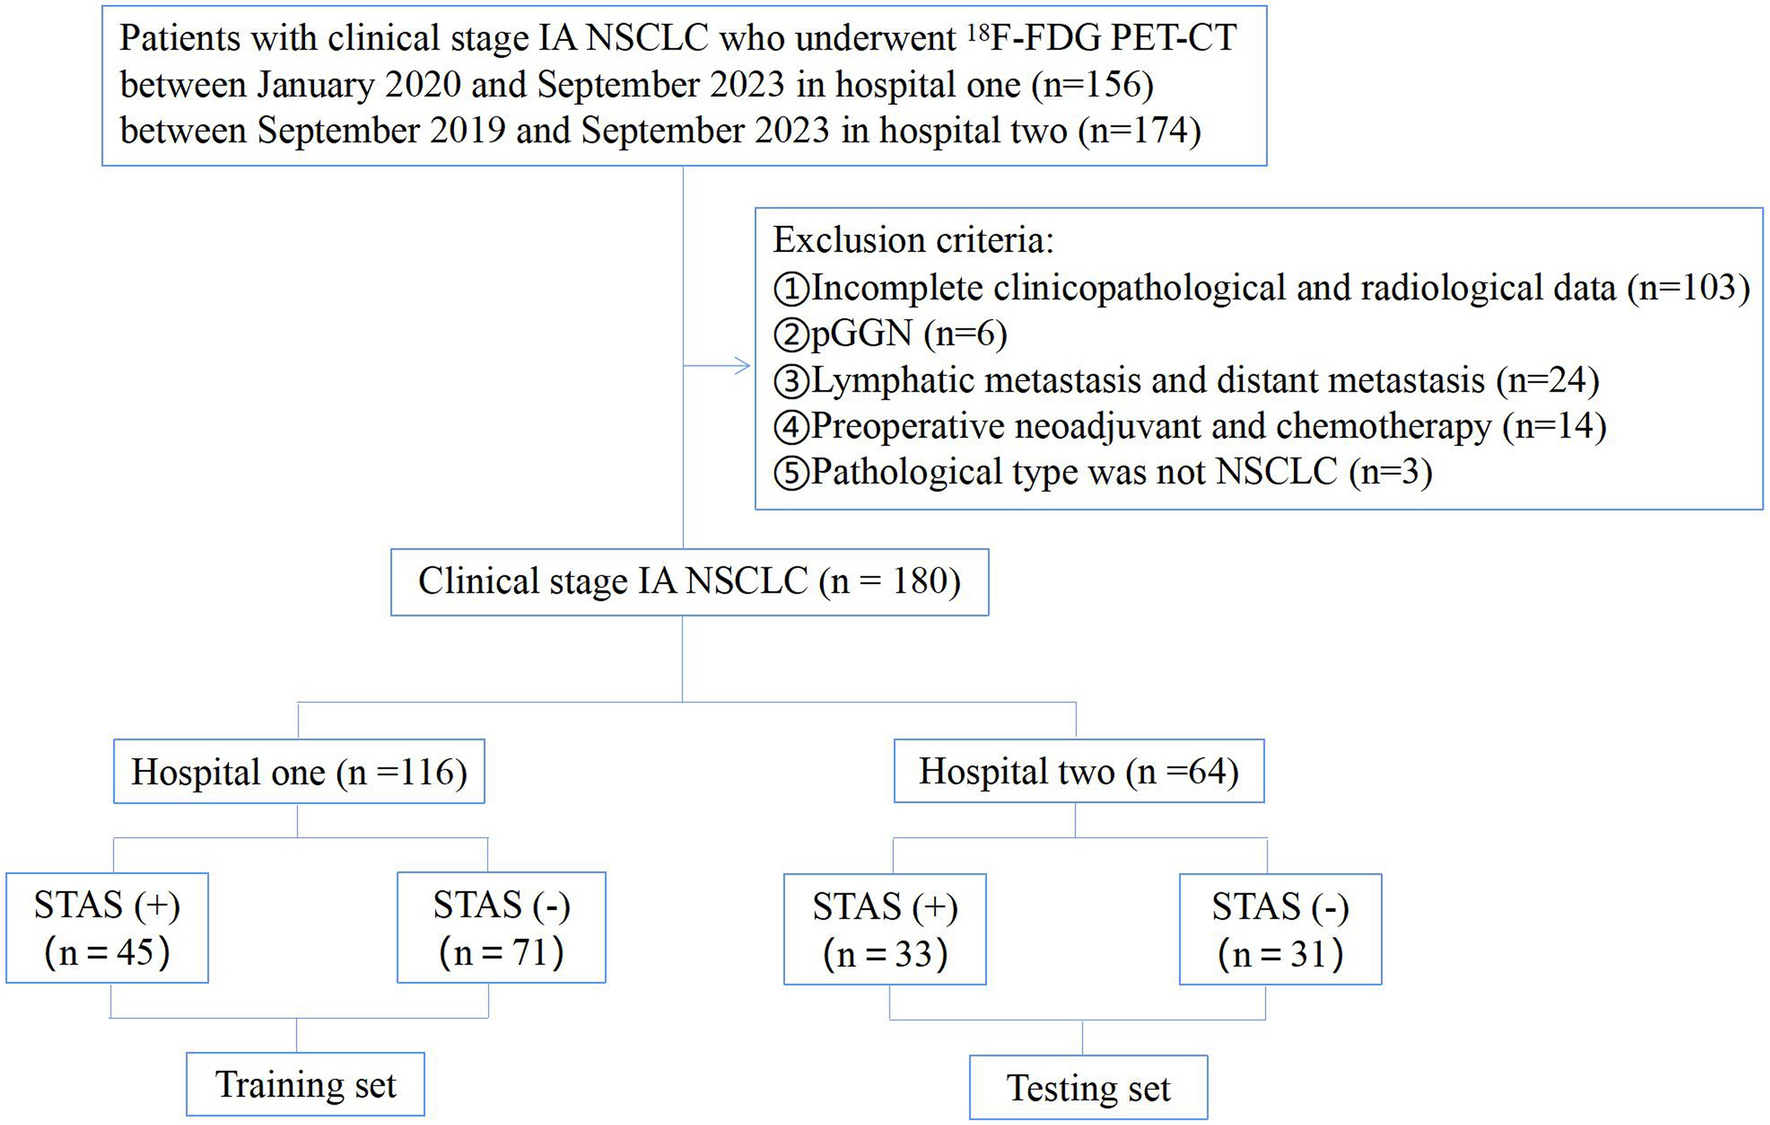 Preoperative nomogram for predicting spread through air spaces in clinical-stage IA non-small cell lung cancer using 18F-fluorodeoxyglucose positron emission tomography/computed tomography